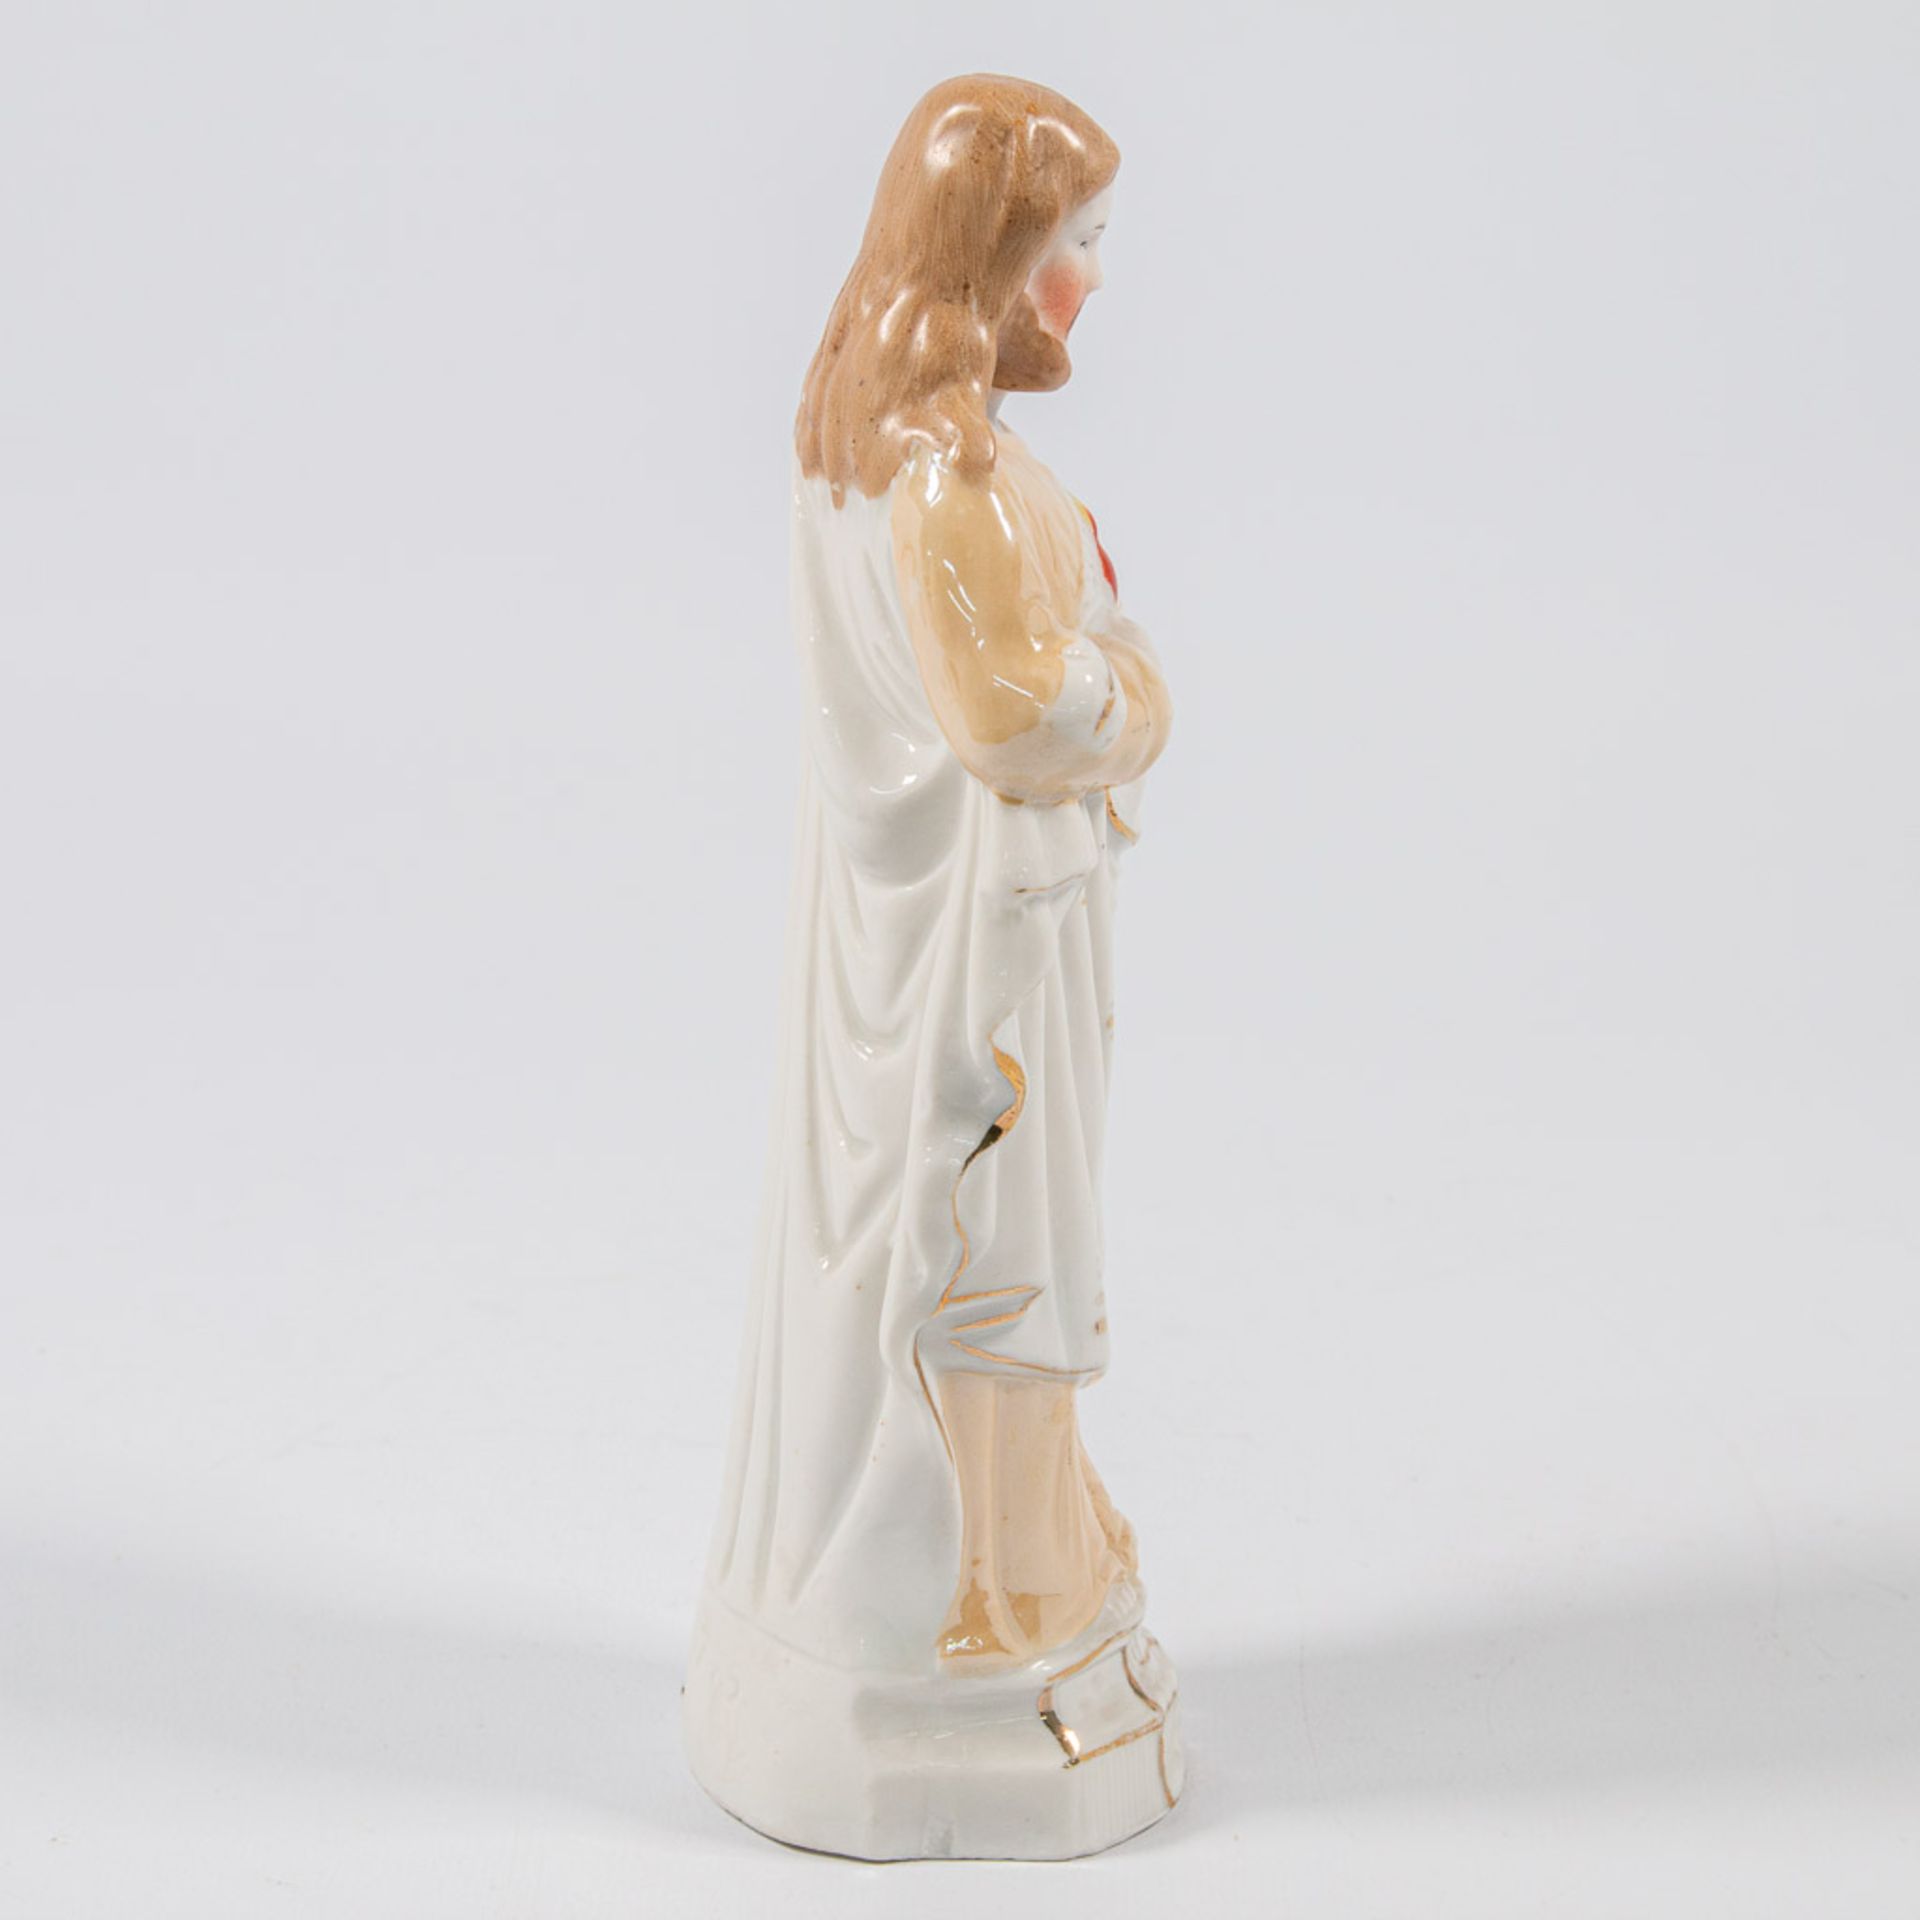 A collection of 11 bisque porcelain holy statues, Mary, Joseph, and Madonna. - Image 3 of 49